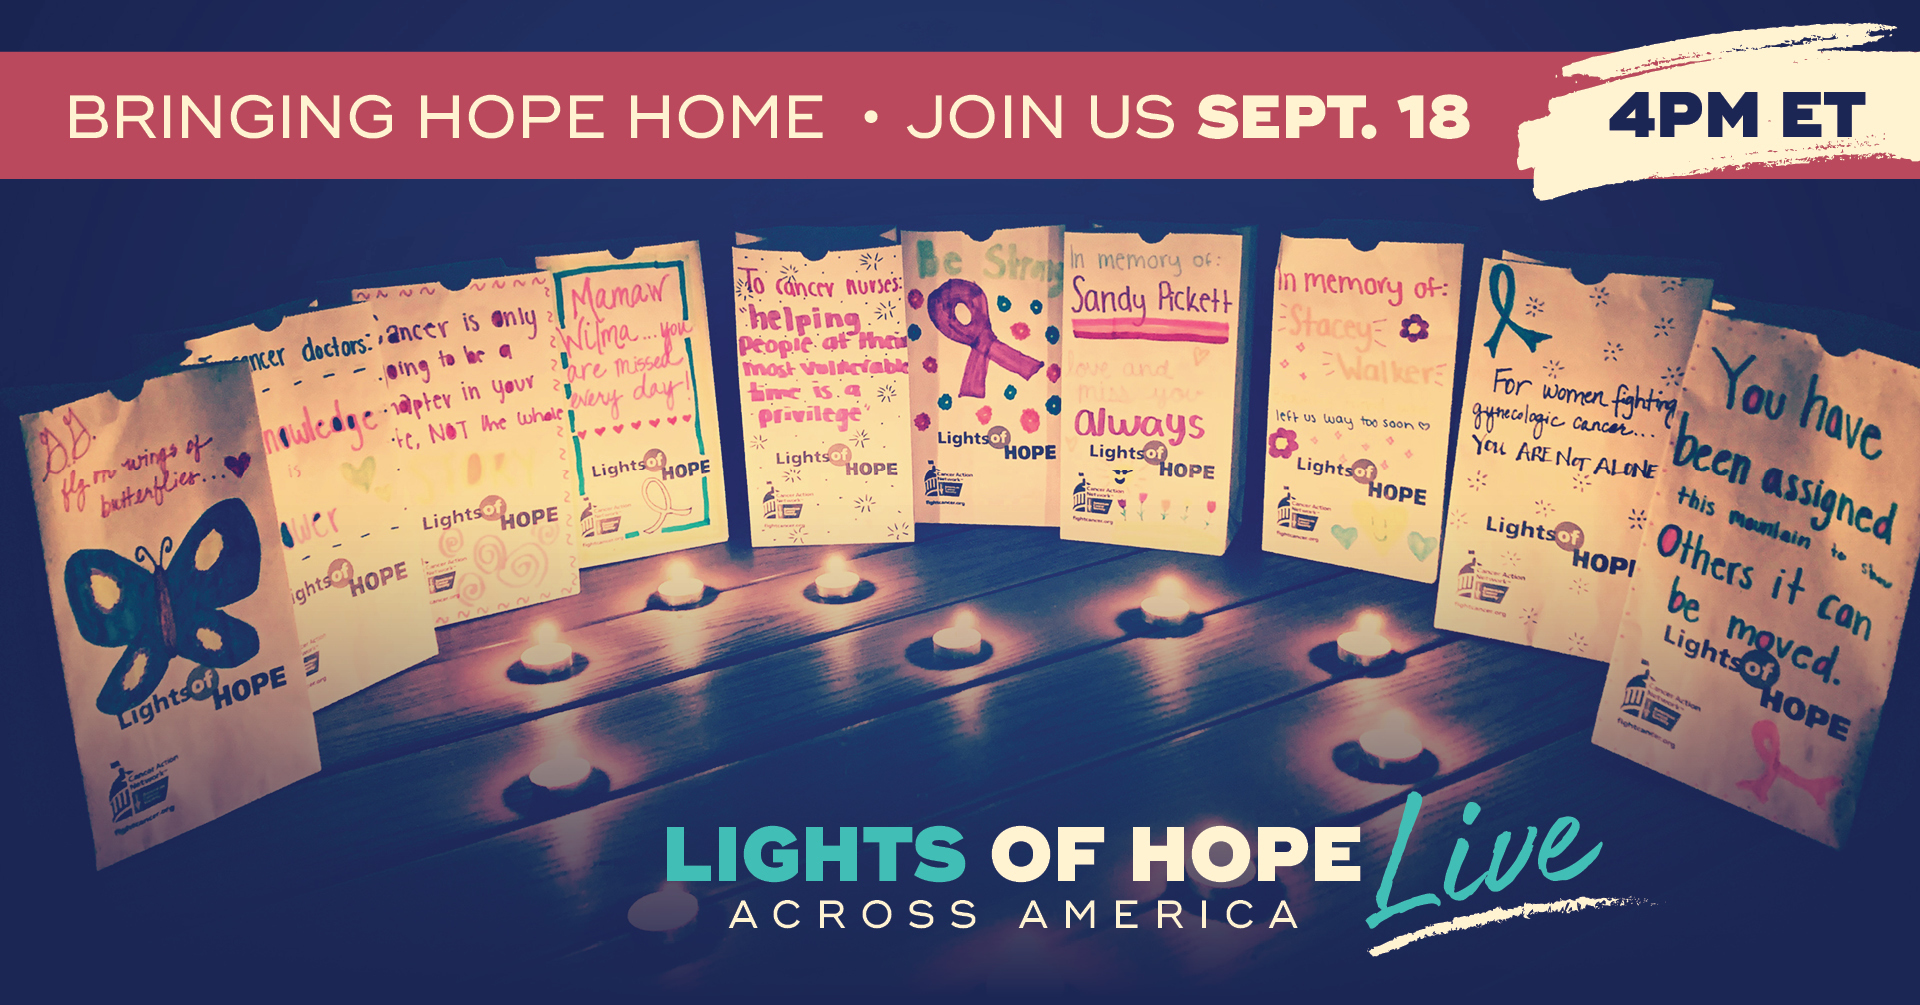 Lights of Hope American Cancer Society Cancer Action Network